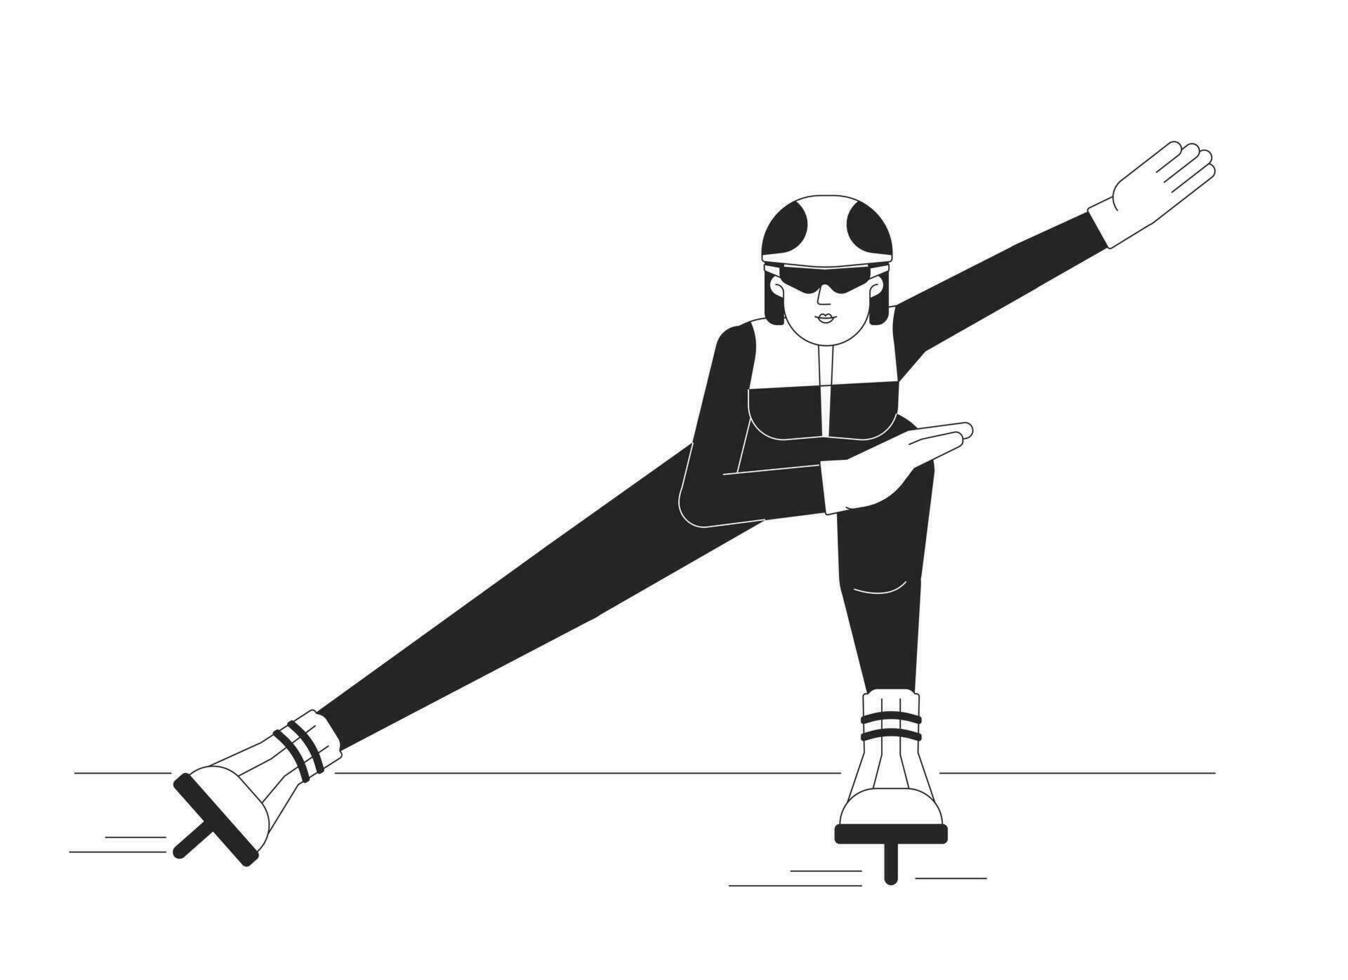 Ice speed skater woman black and white cartoon flat illustration. Short track speedskate sportswoman asian 2D lineart character isolated. Competitive wintersport monochrome scene vector outline image